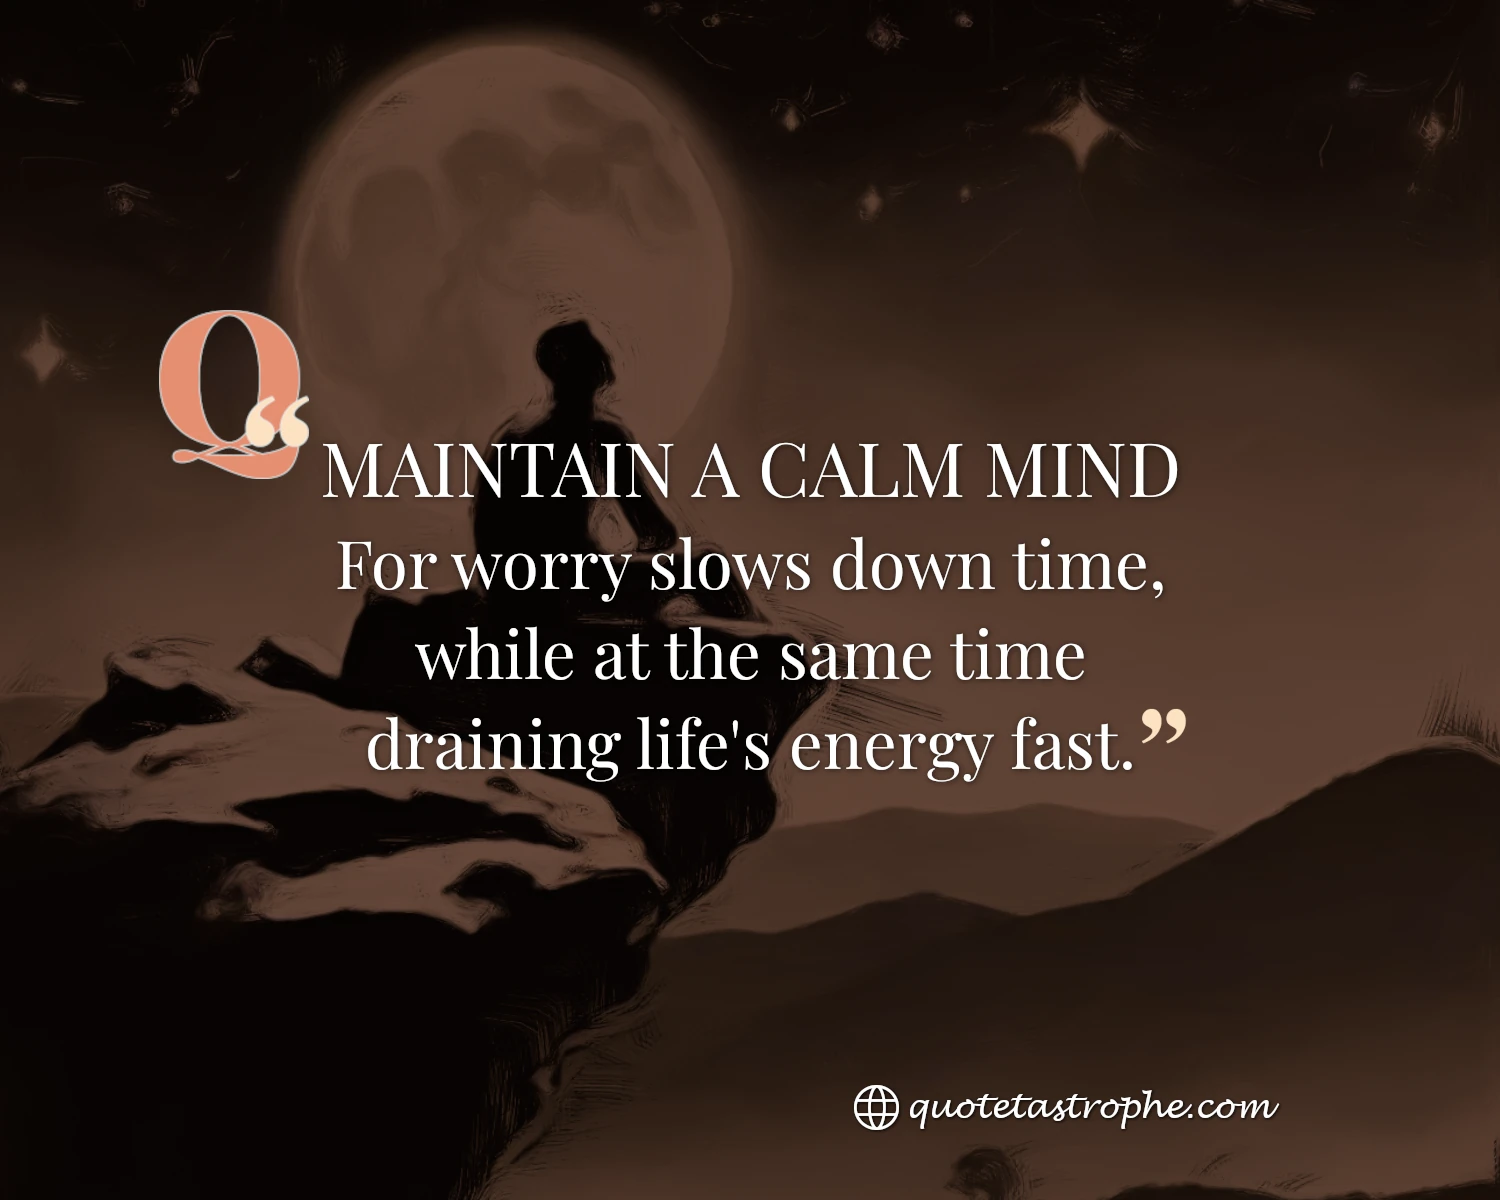 Maintain a Calm Mind For Worry Slows Down Time